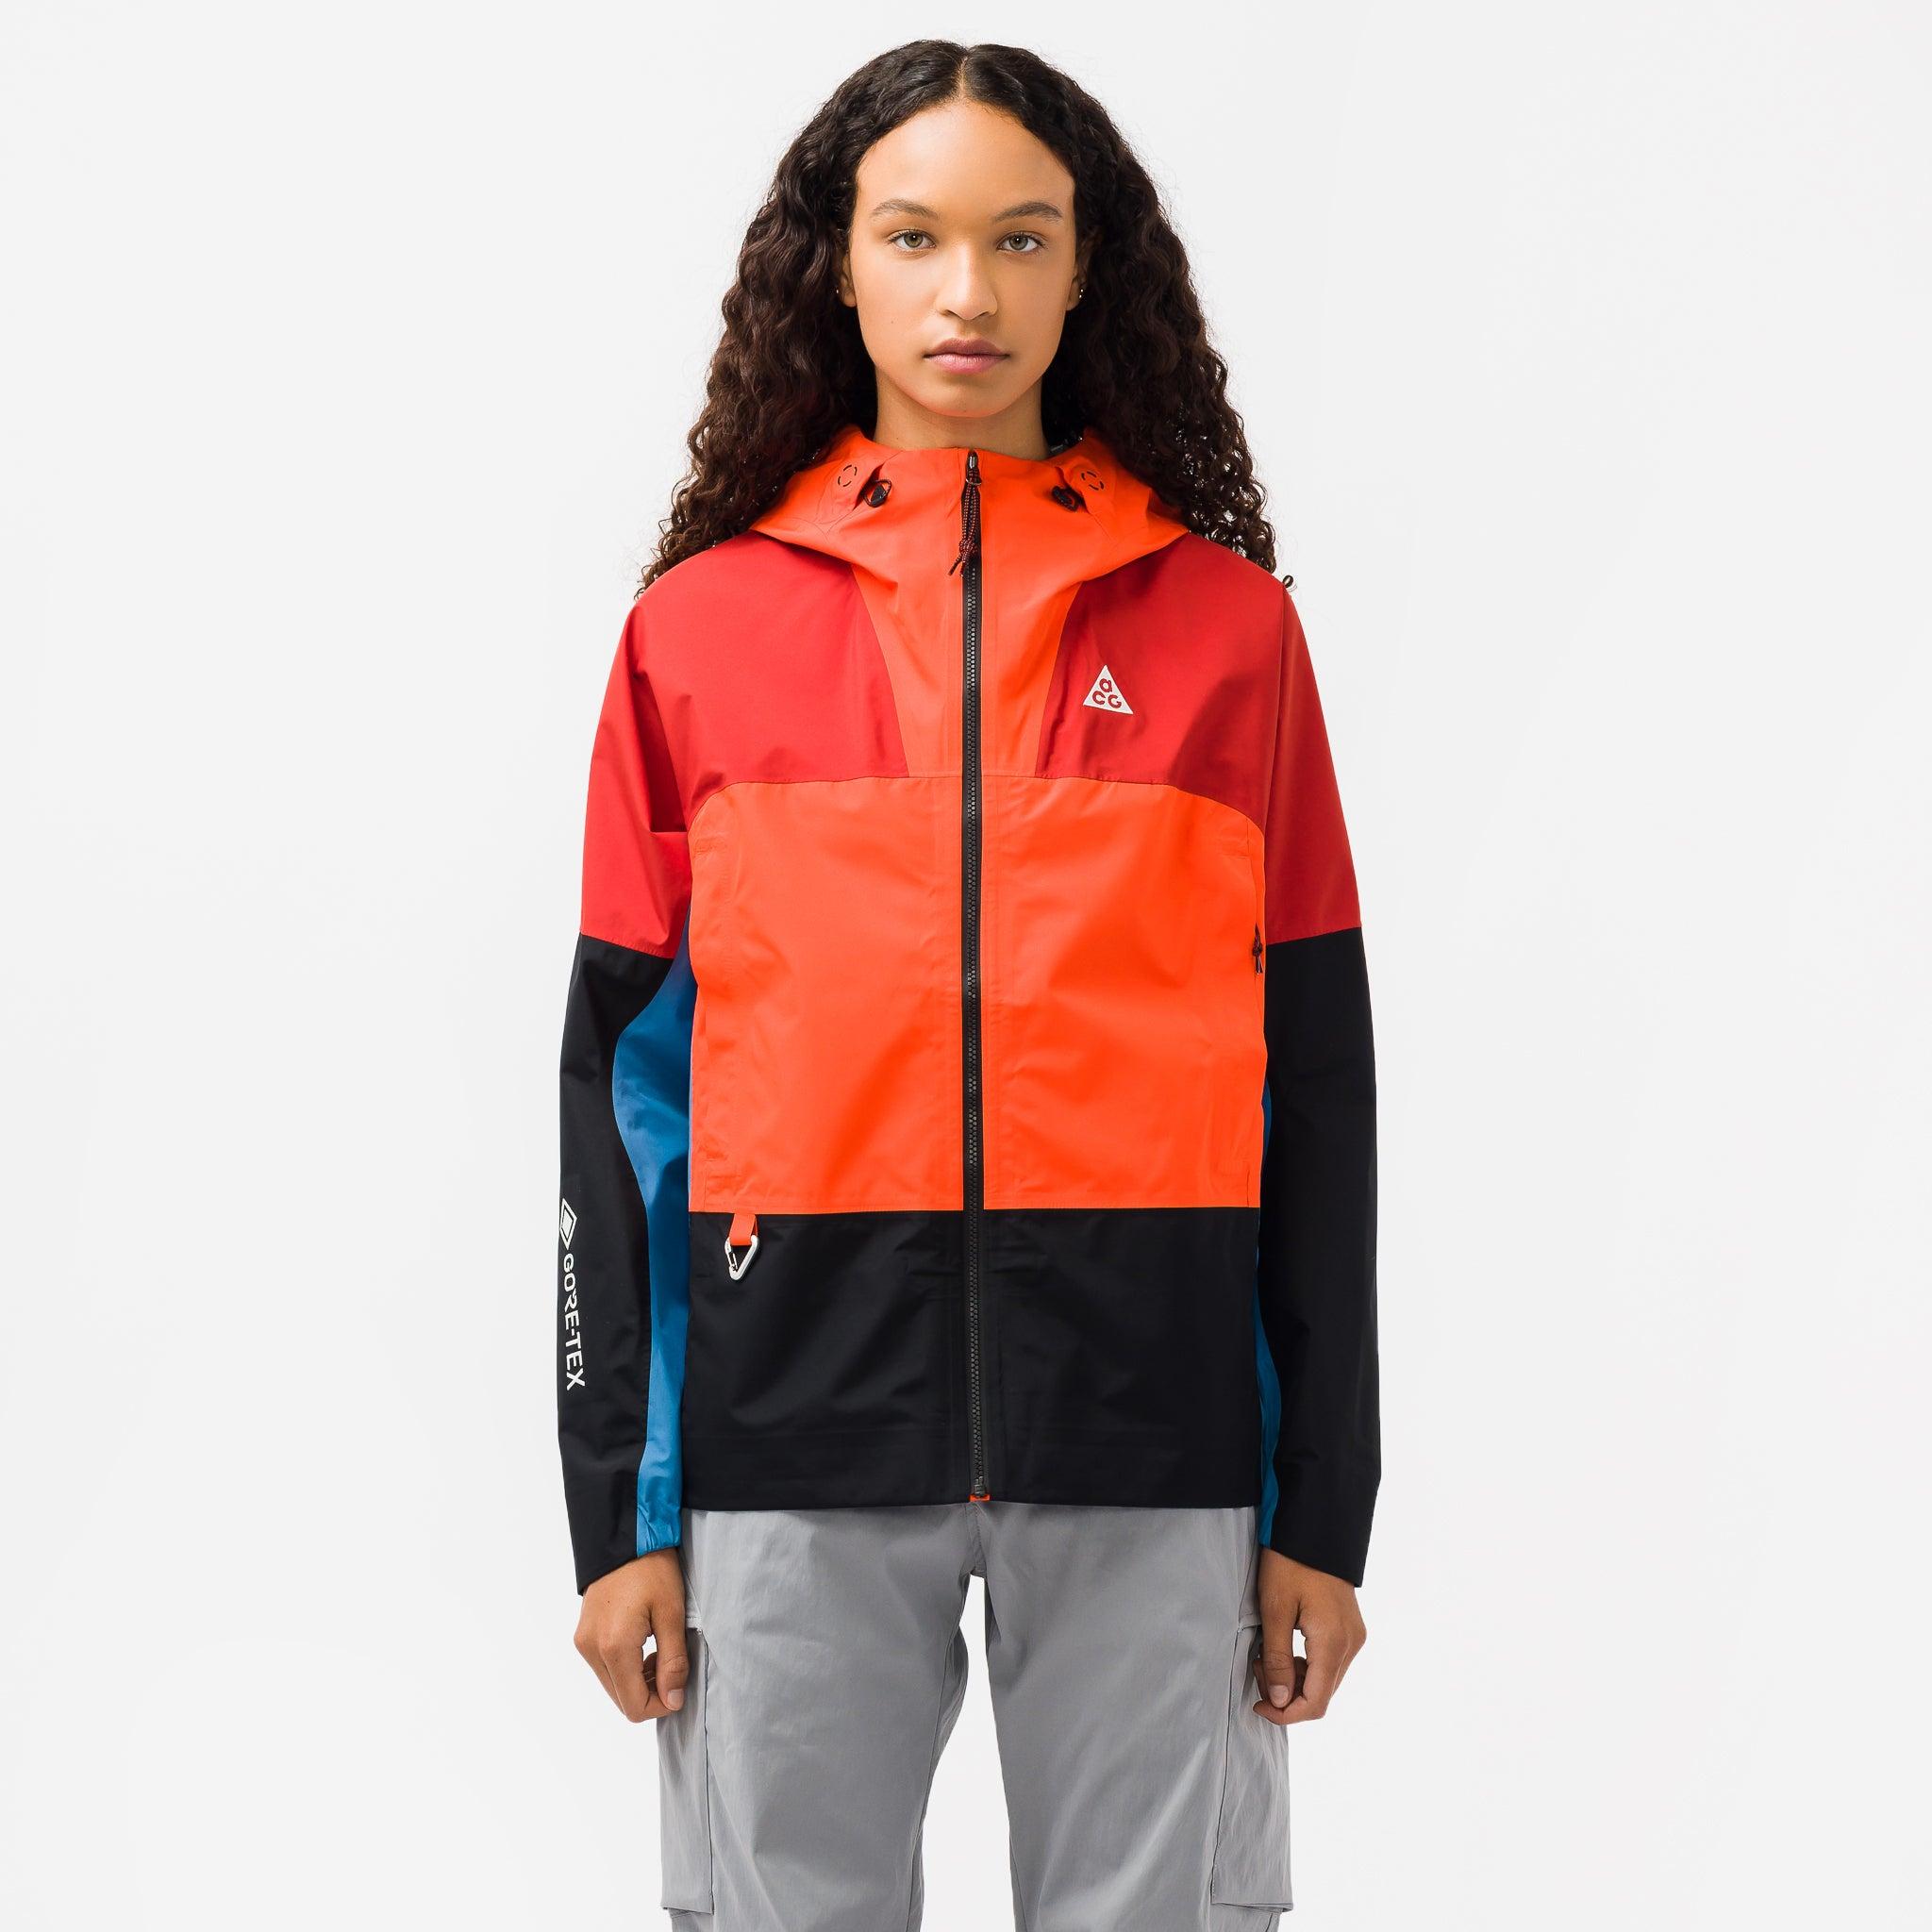 Nike Acg Storm-fit Chain Of Craters Jacket in Orange | Lyst